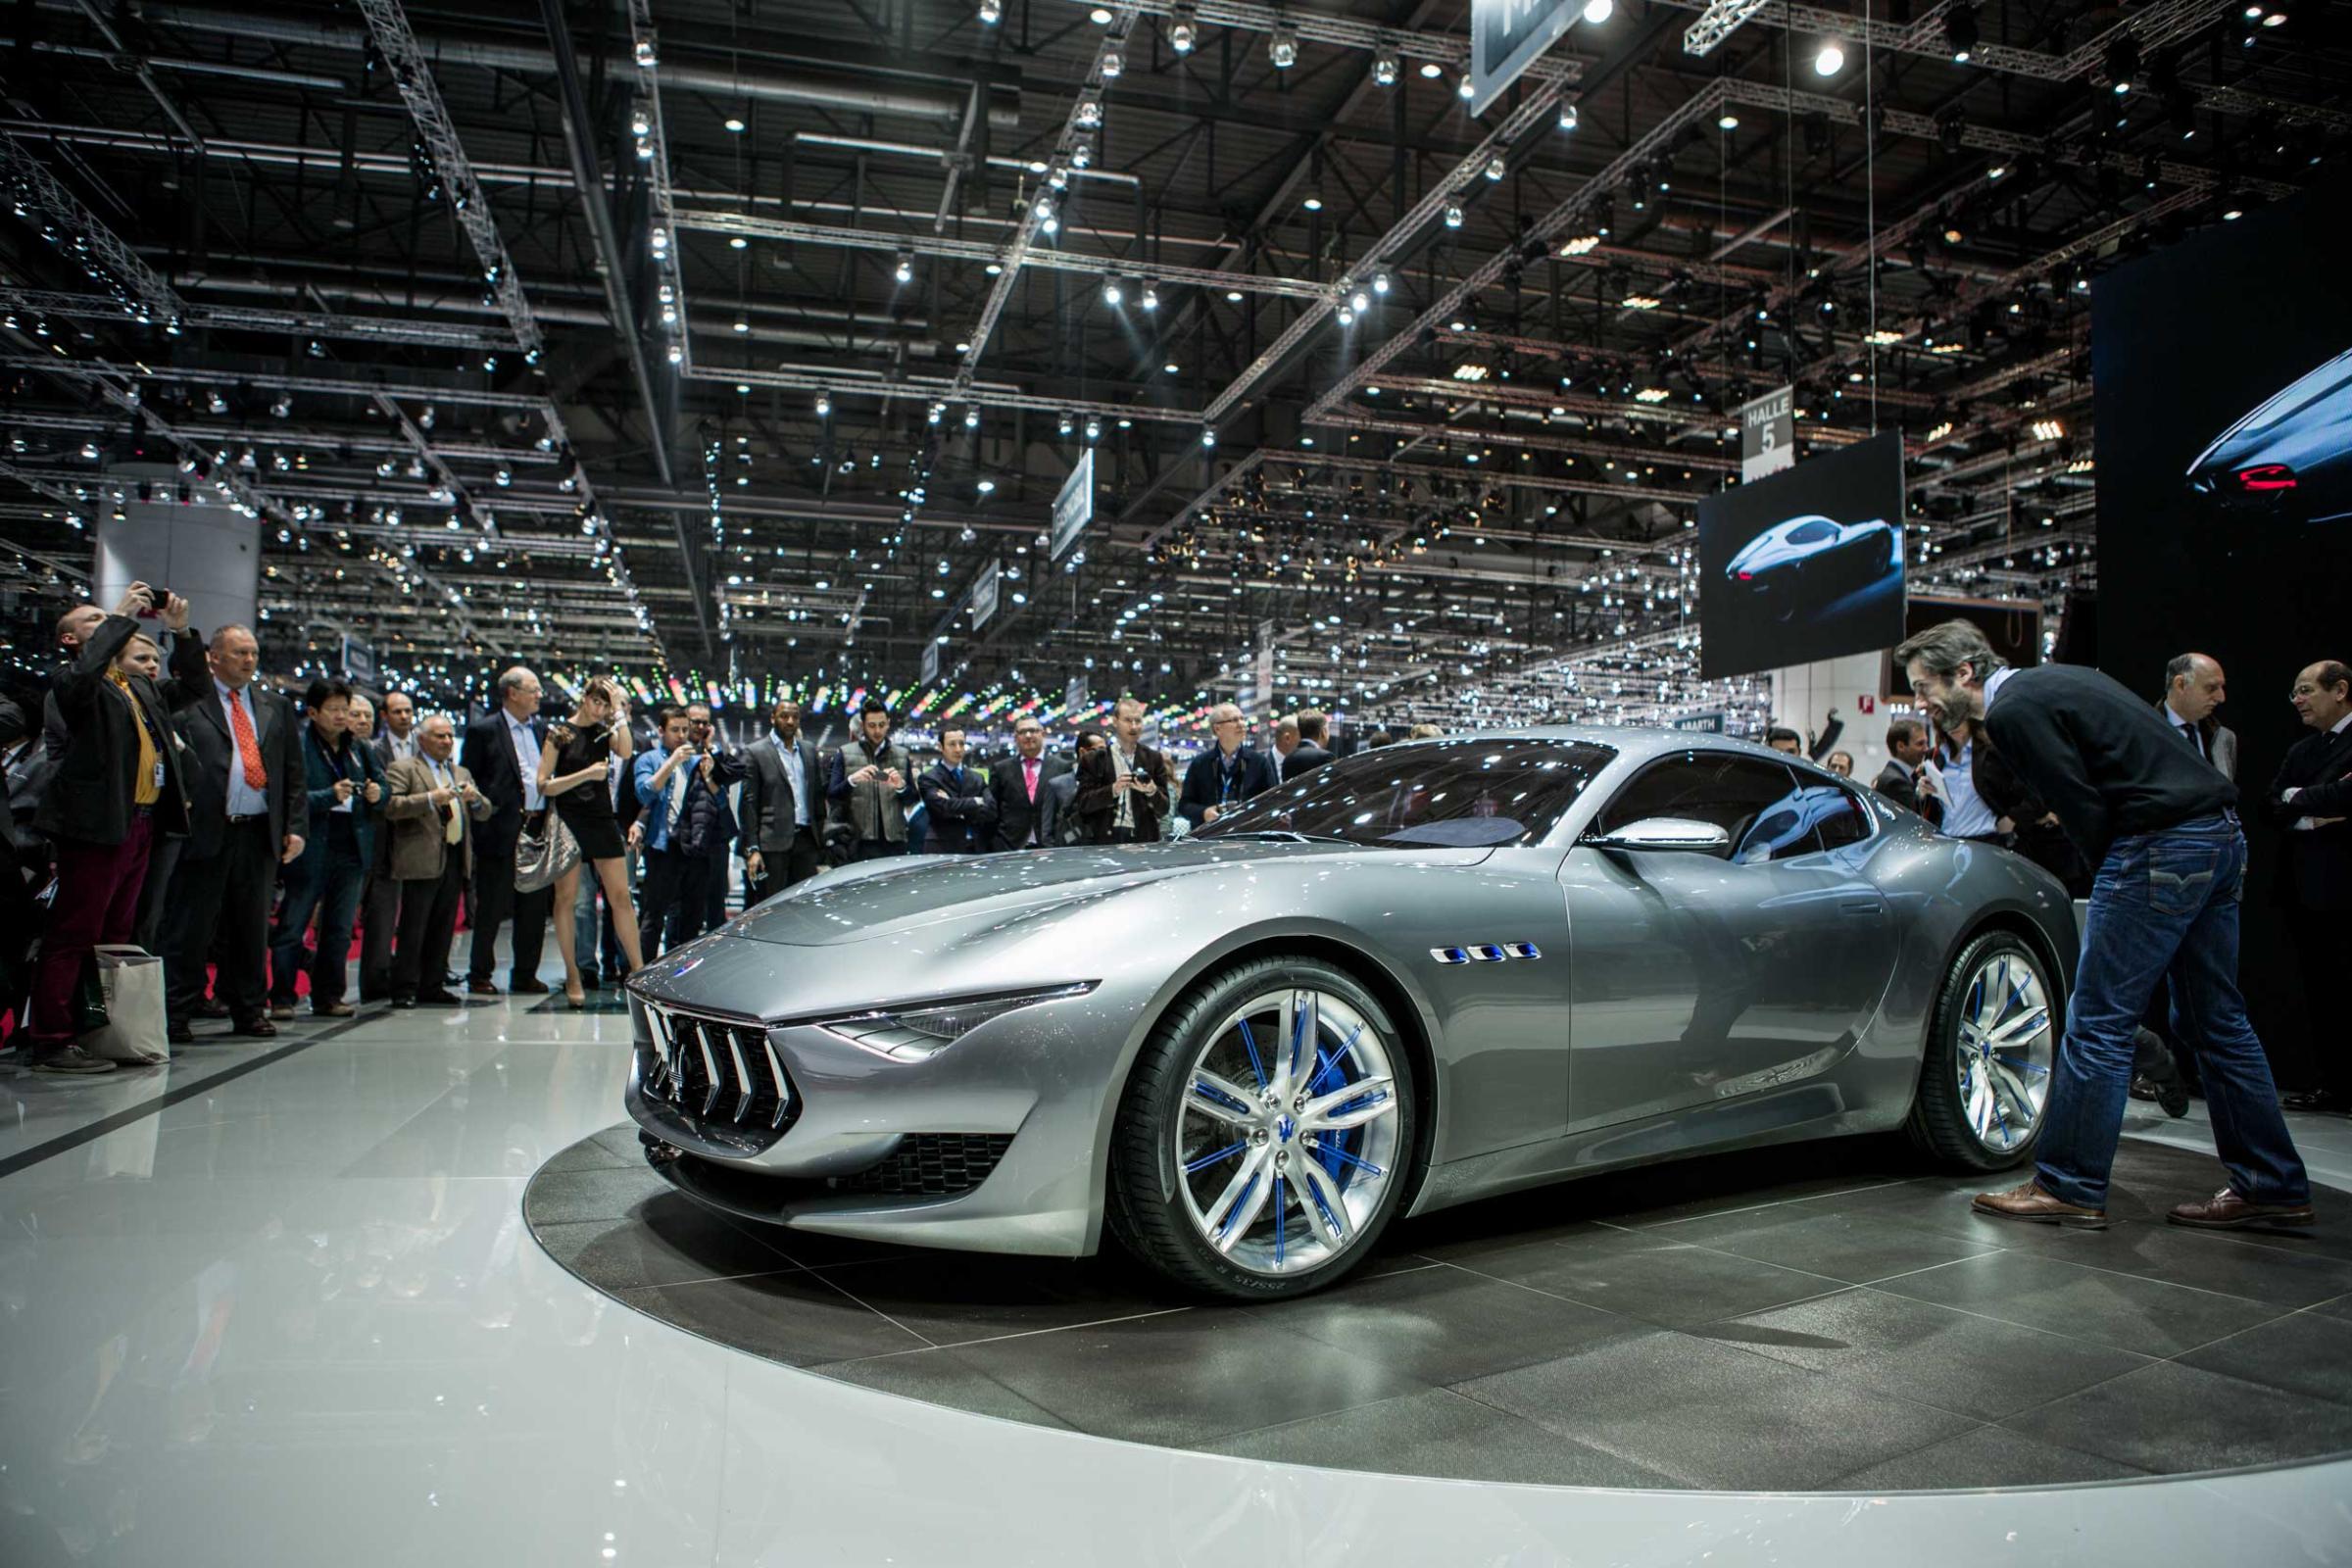 The Maserati Alfieri concept car is displayed at the group's stand of the Geneva Motor Show, on March 4, 2014.